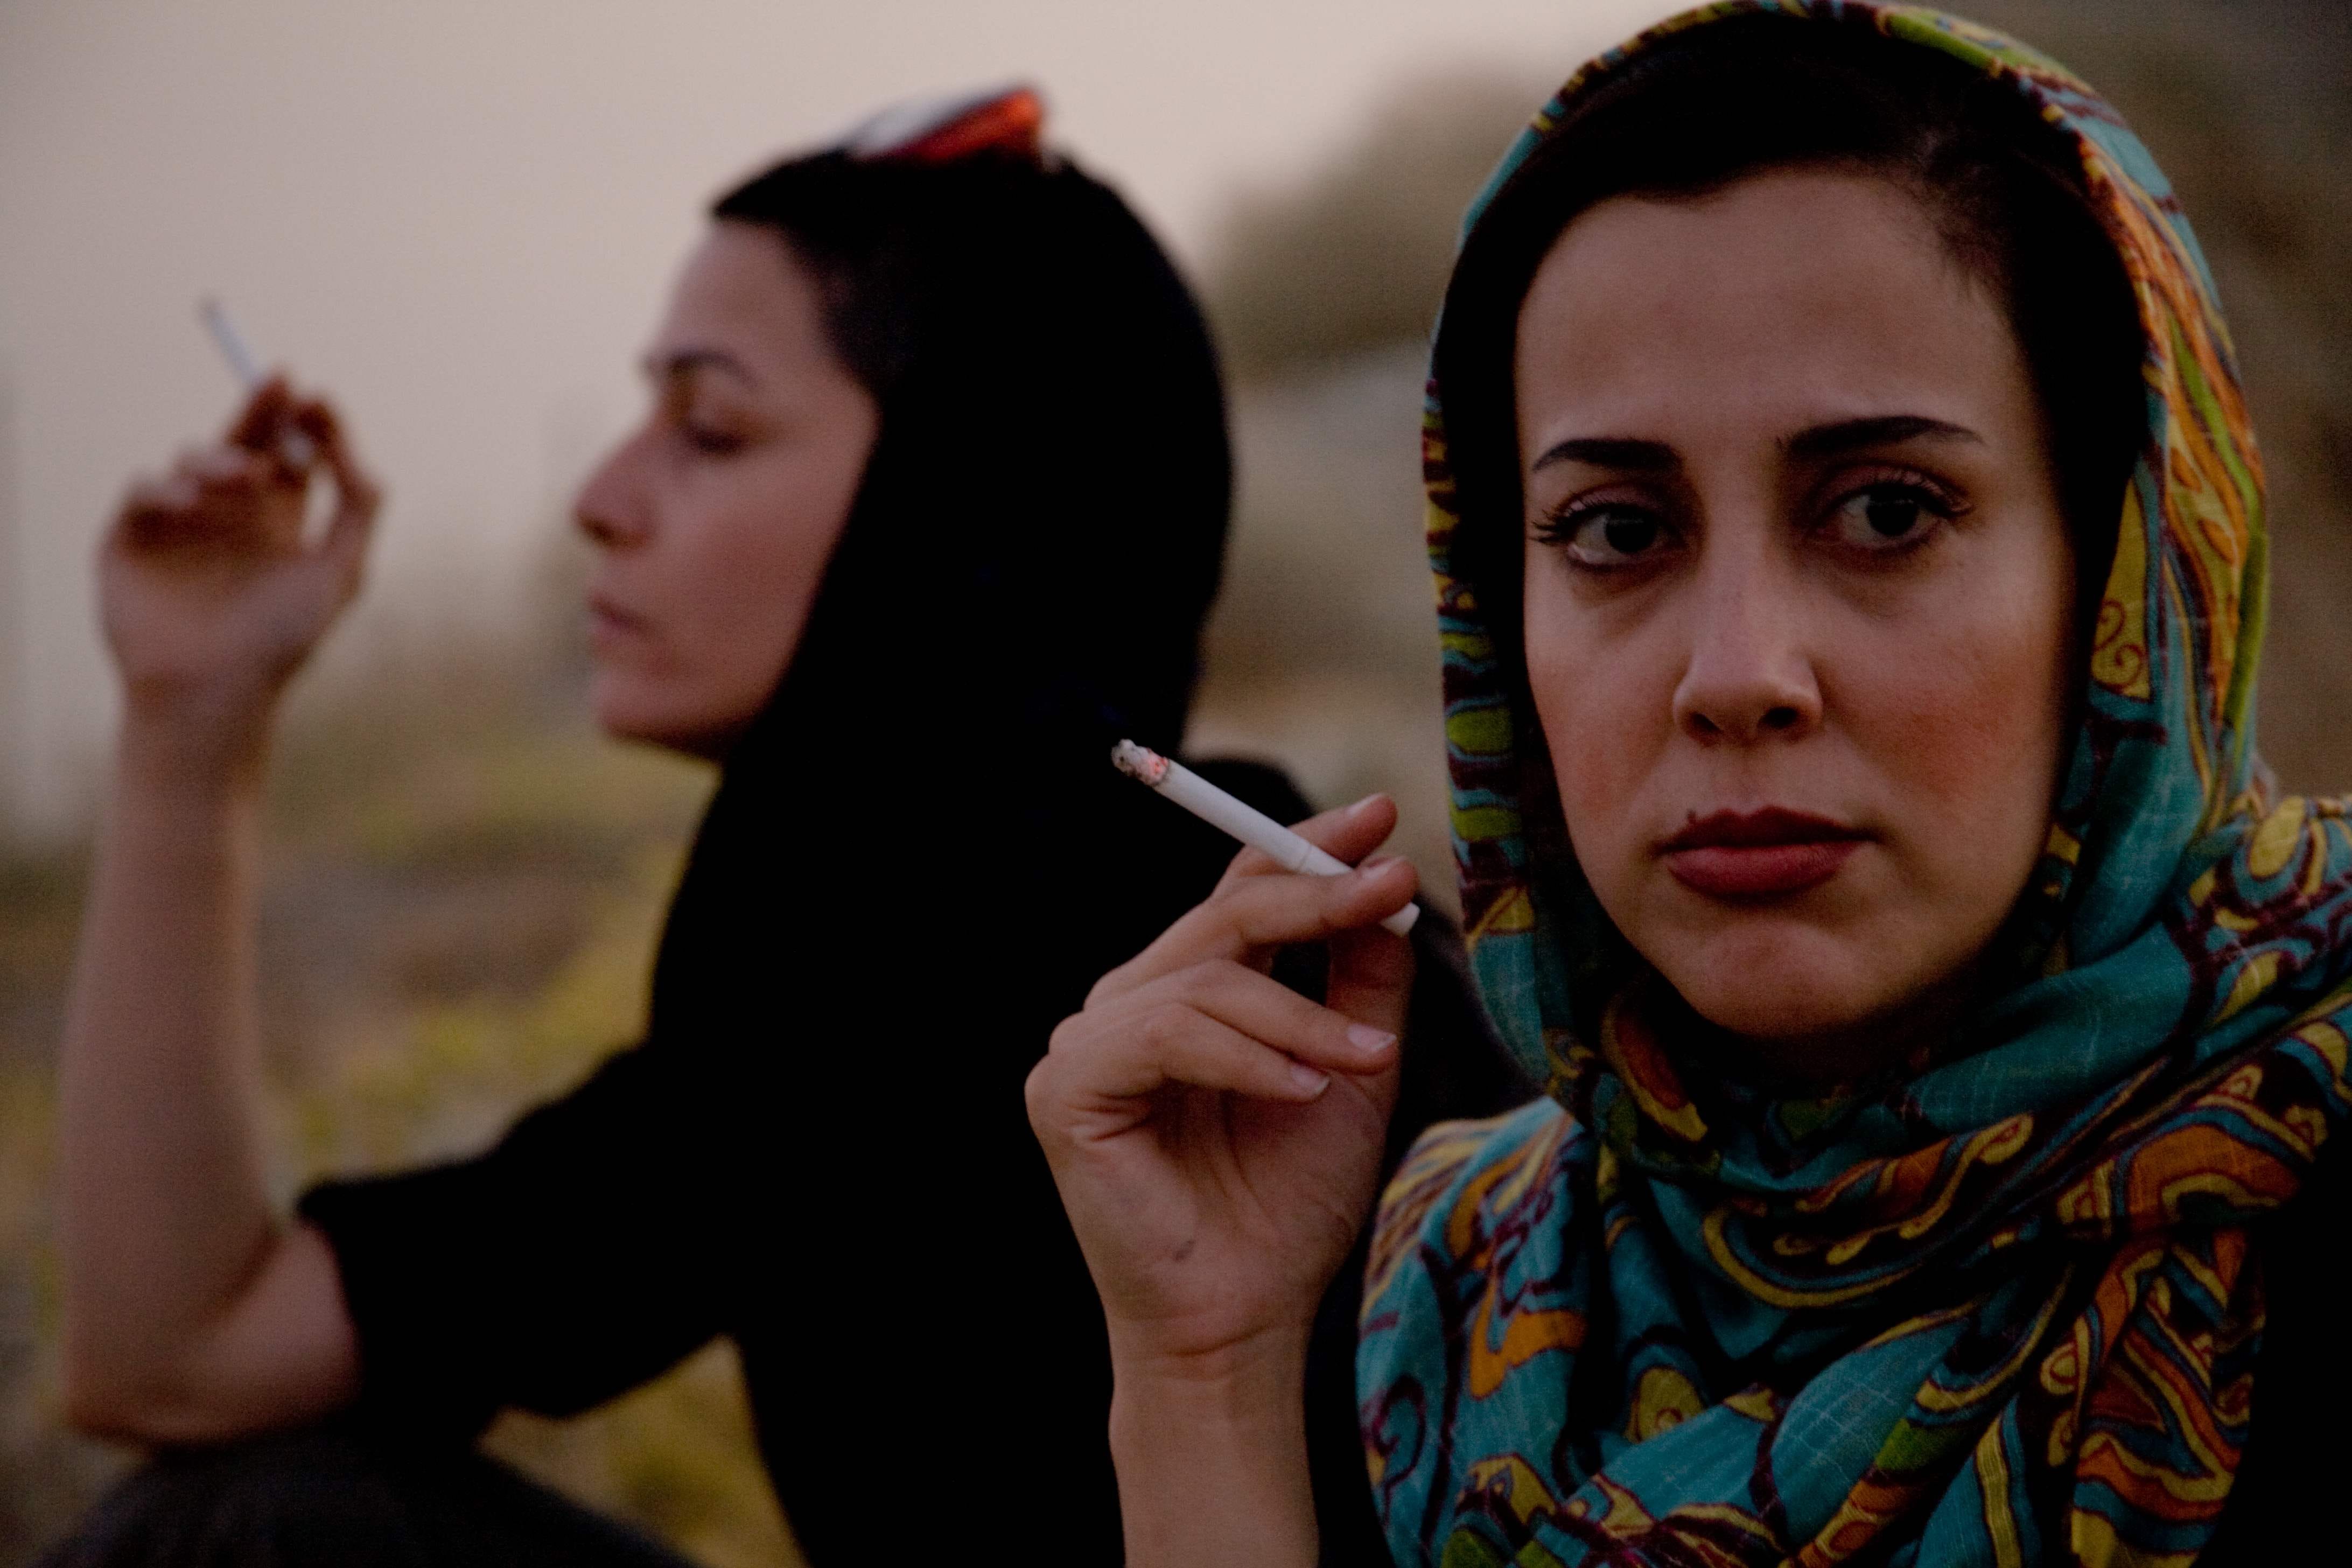 30-essential-iranian-films-to-watch-in-honor-of-nowruz-persian-new